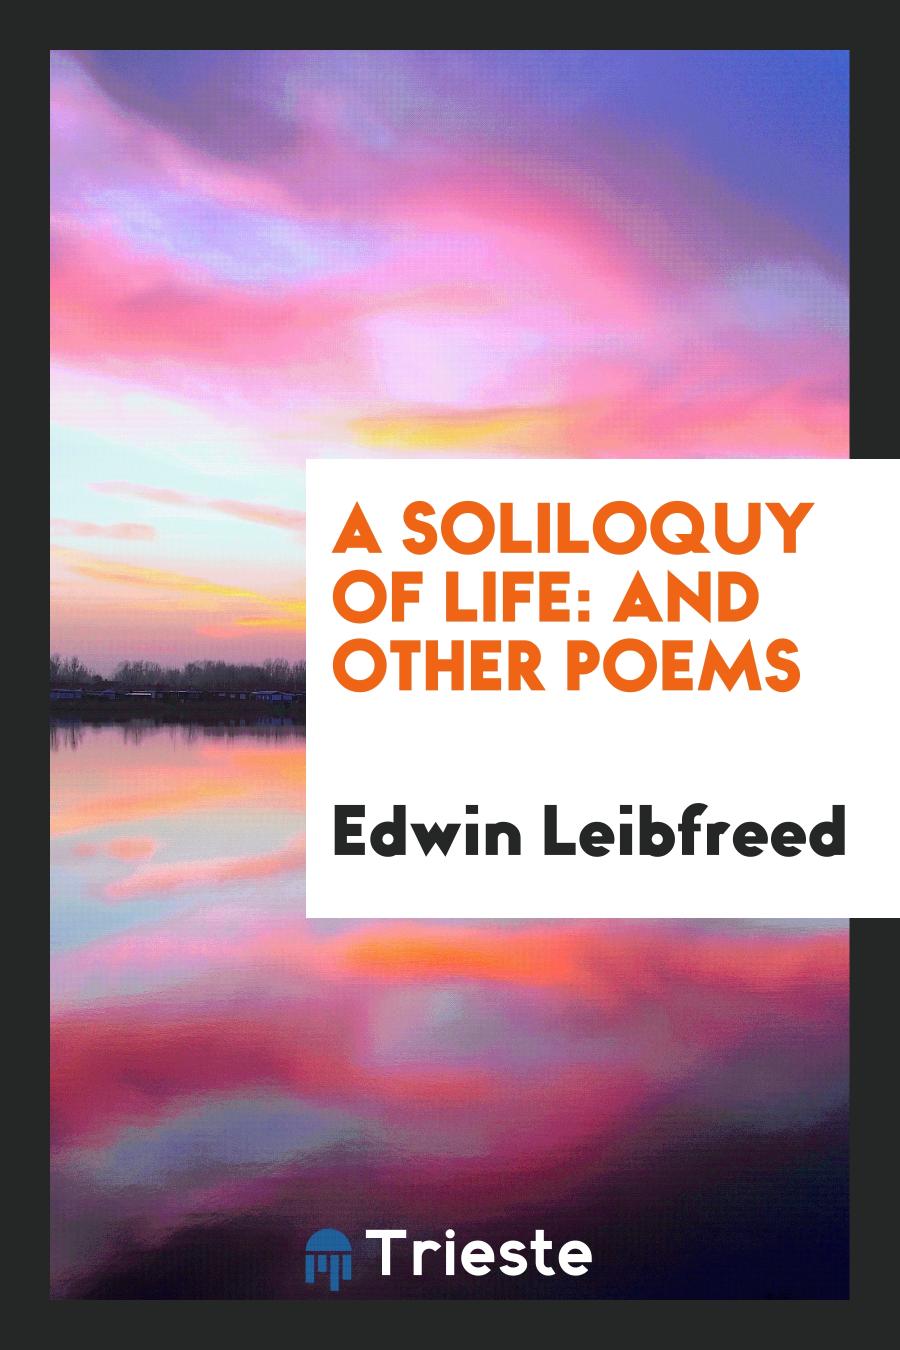 A Soliloquy of Life: And Other Poems